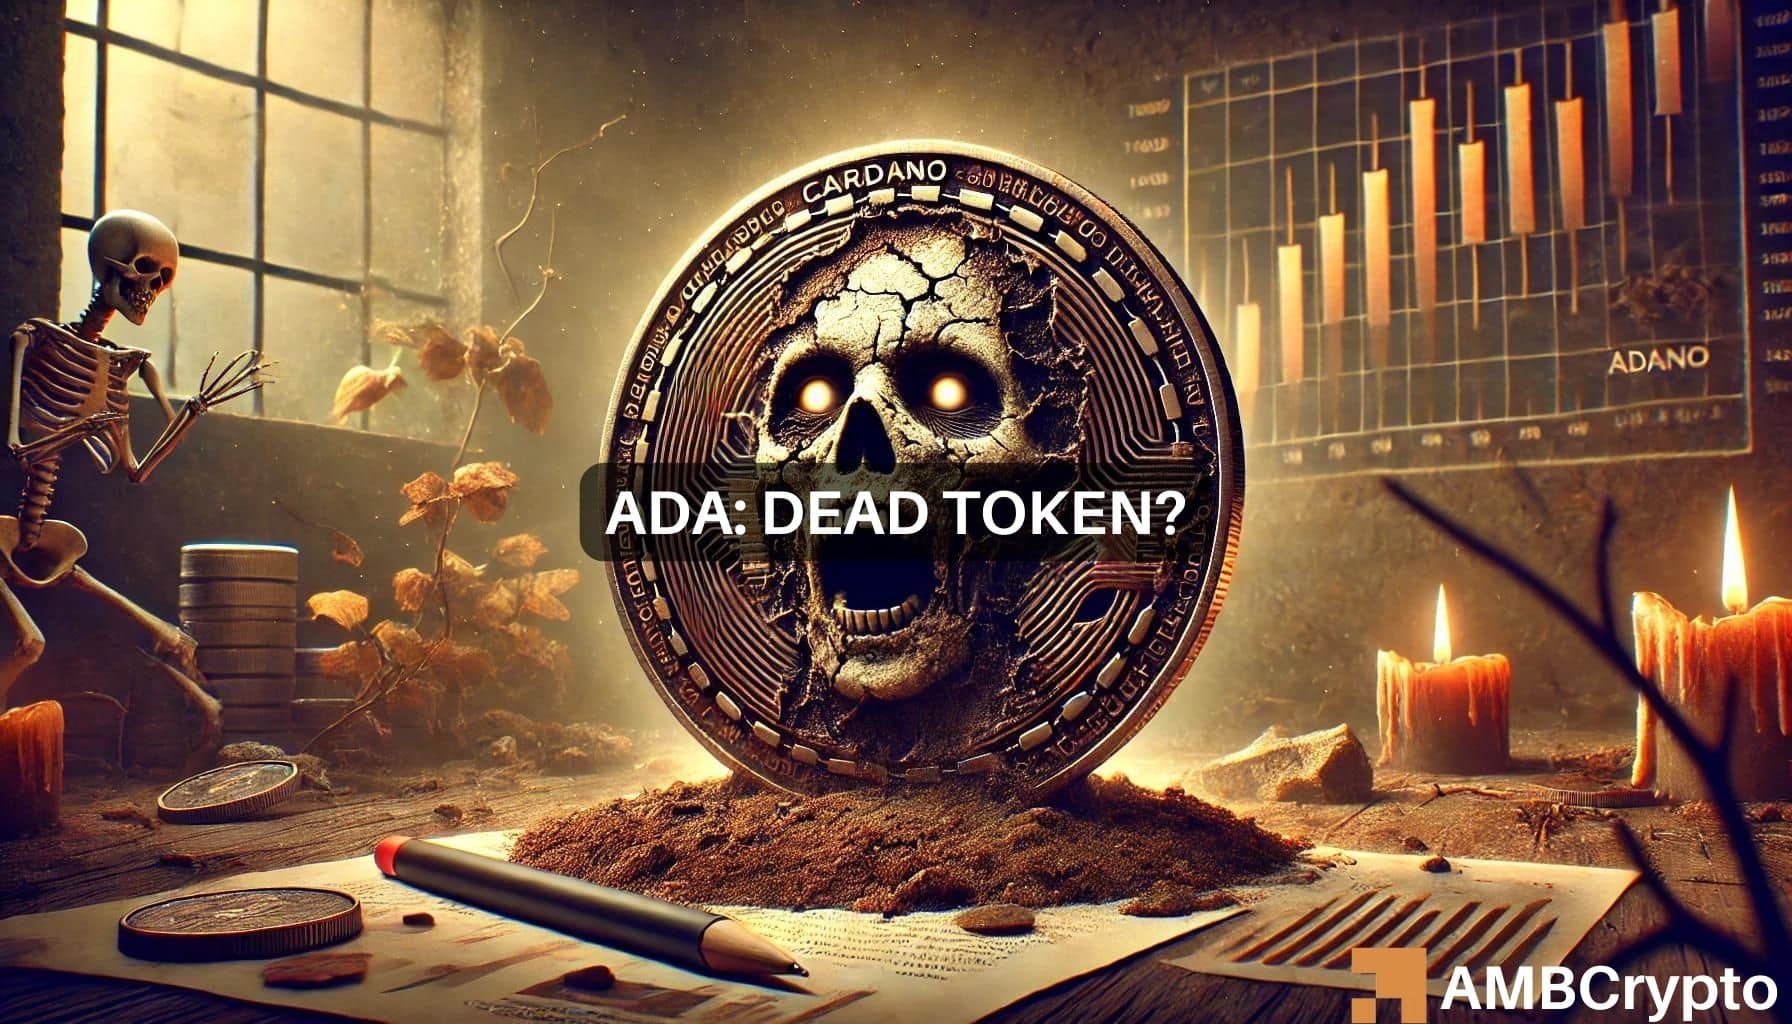 Why Charles Hoskinson believes Cardano isn’t ‘dead’ despite ADA’s price fall